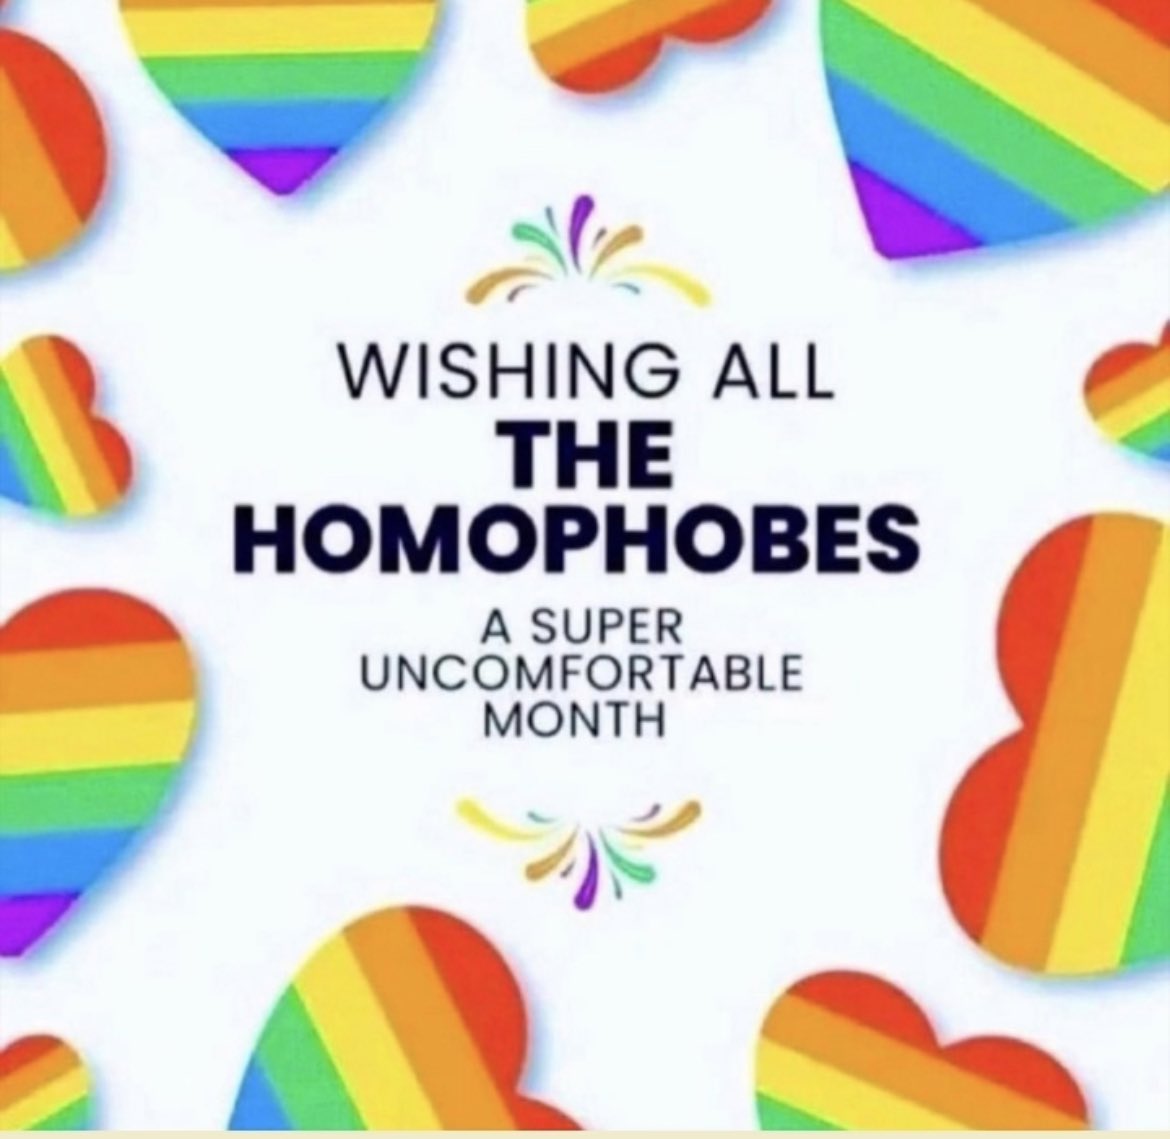 Wishing all the transphobes an even more uncomfortable month